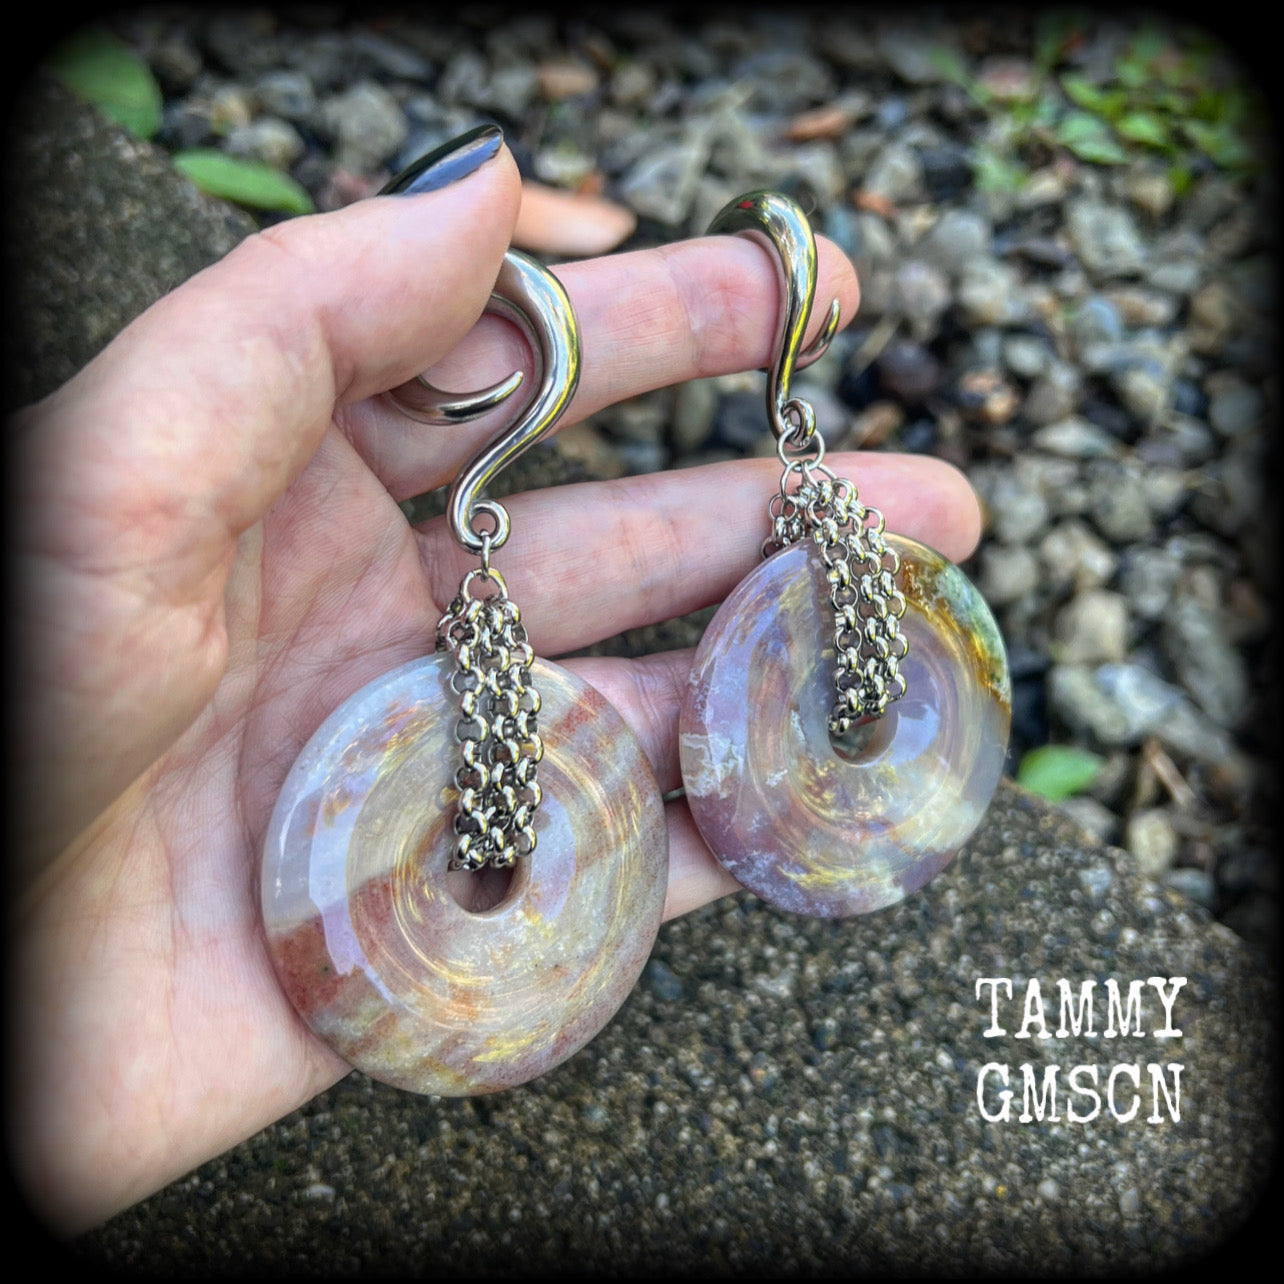 Indian agate ear weights-Hanging gauges